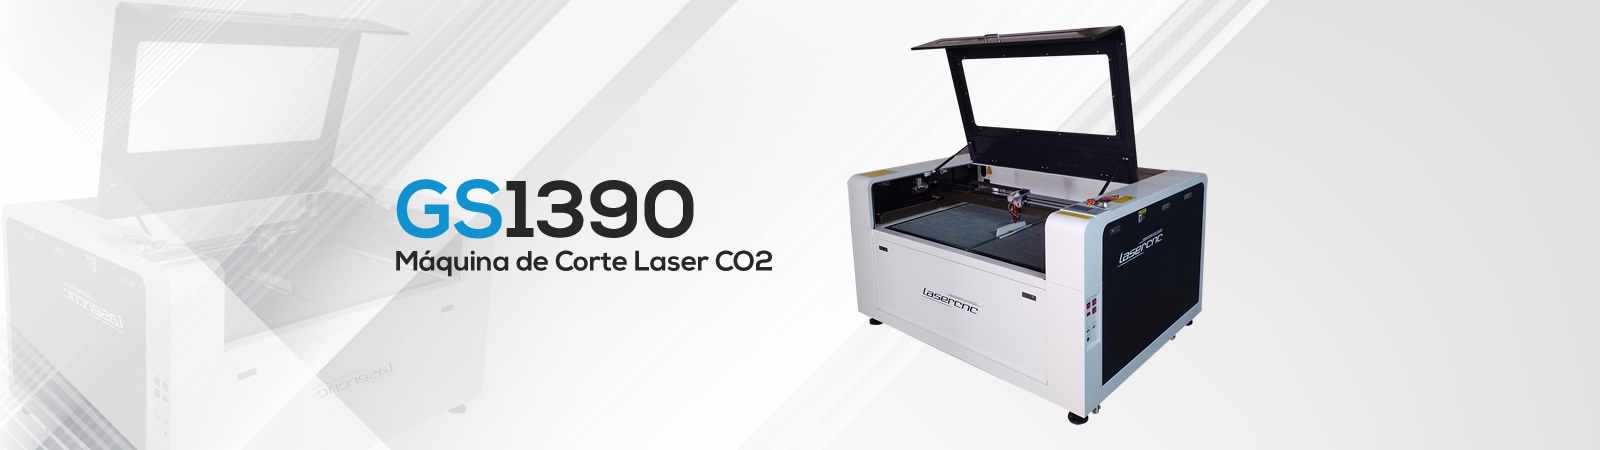 Maquina_Laser_CO2_GS1390_Banner_01